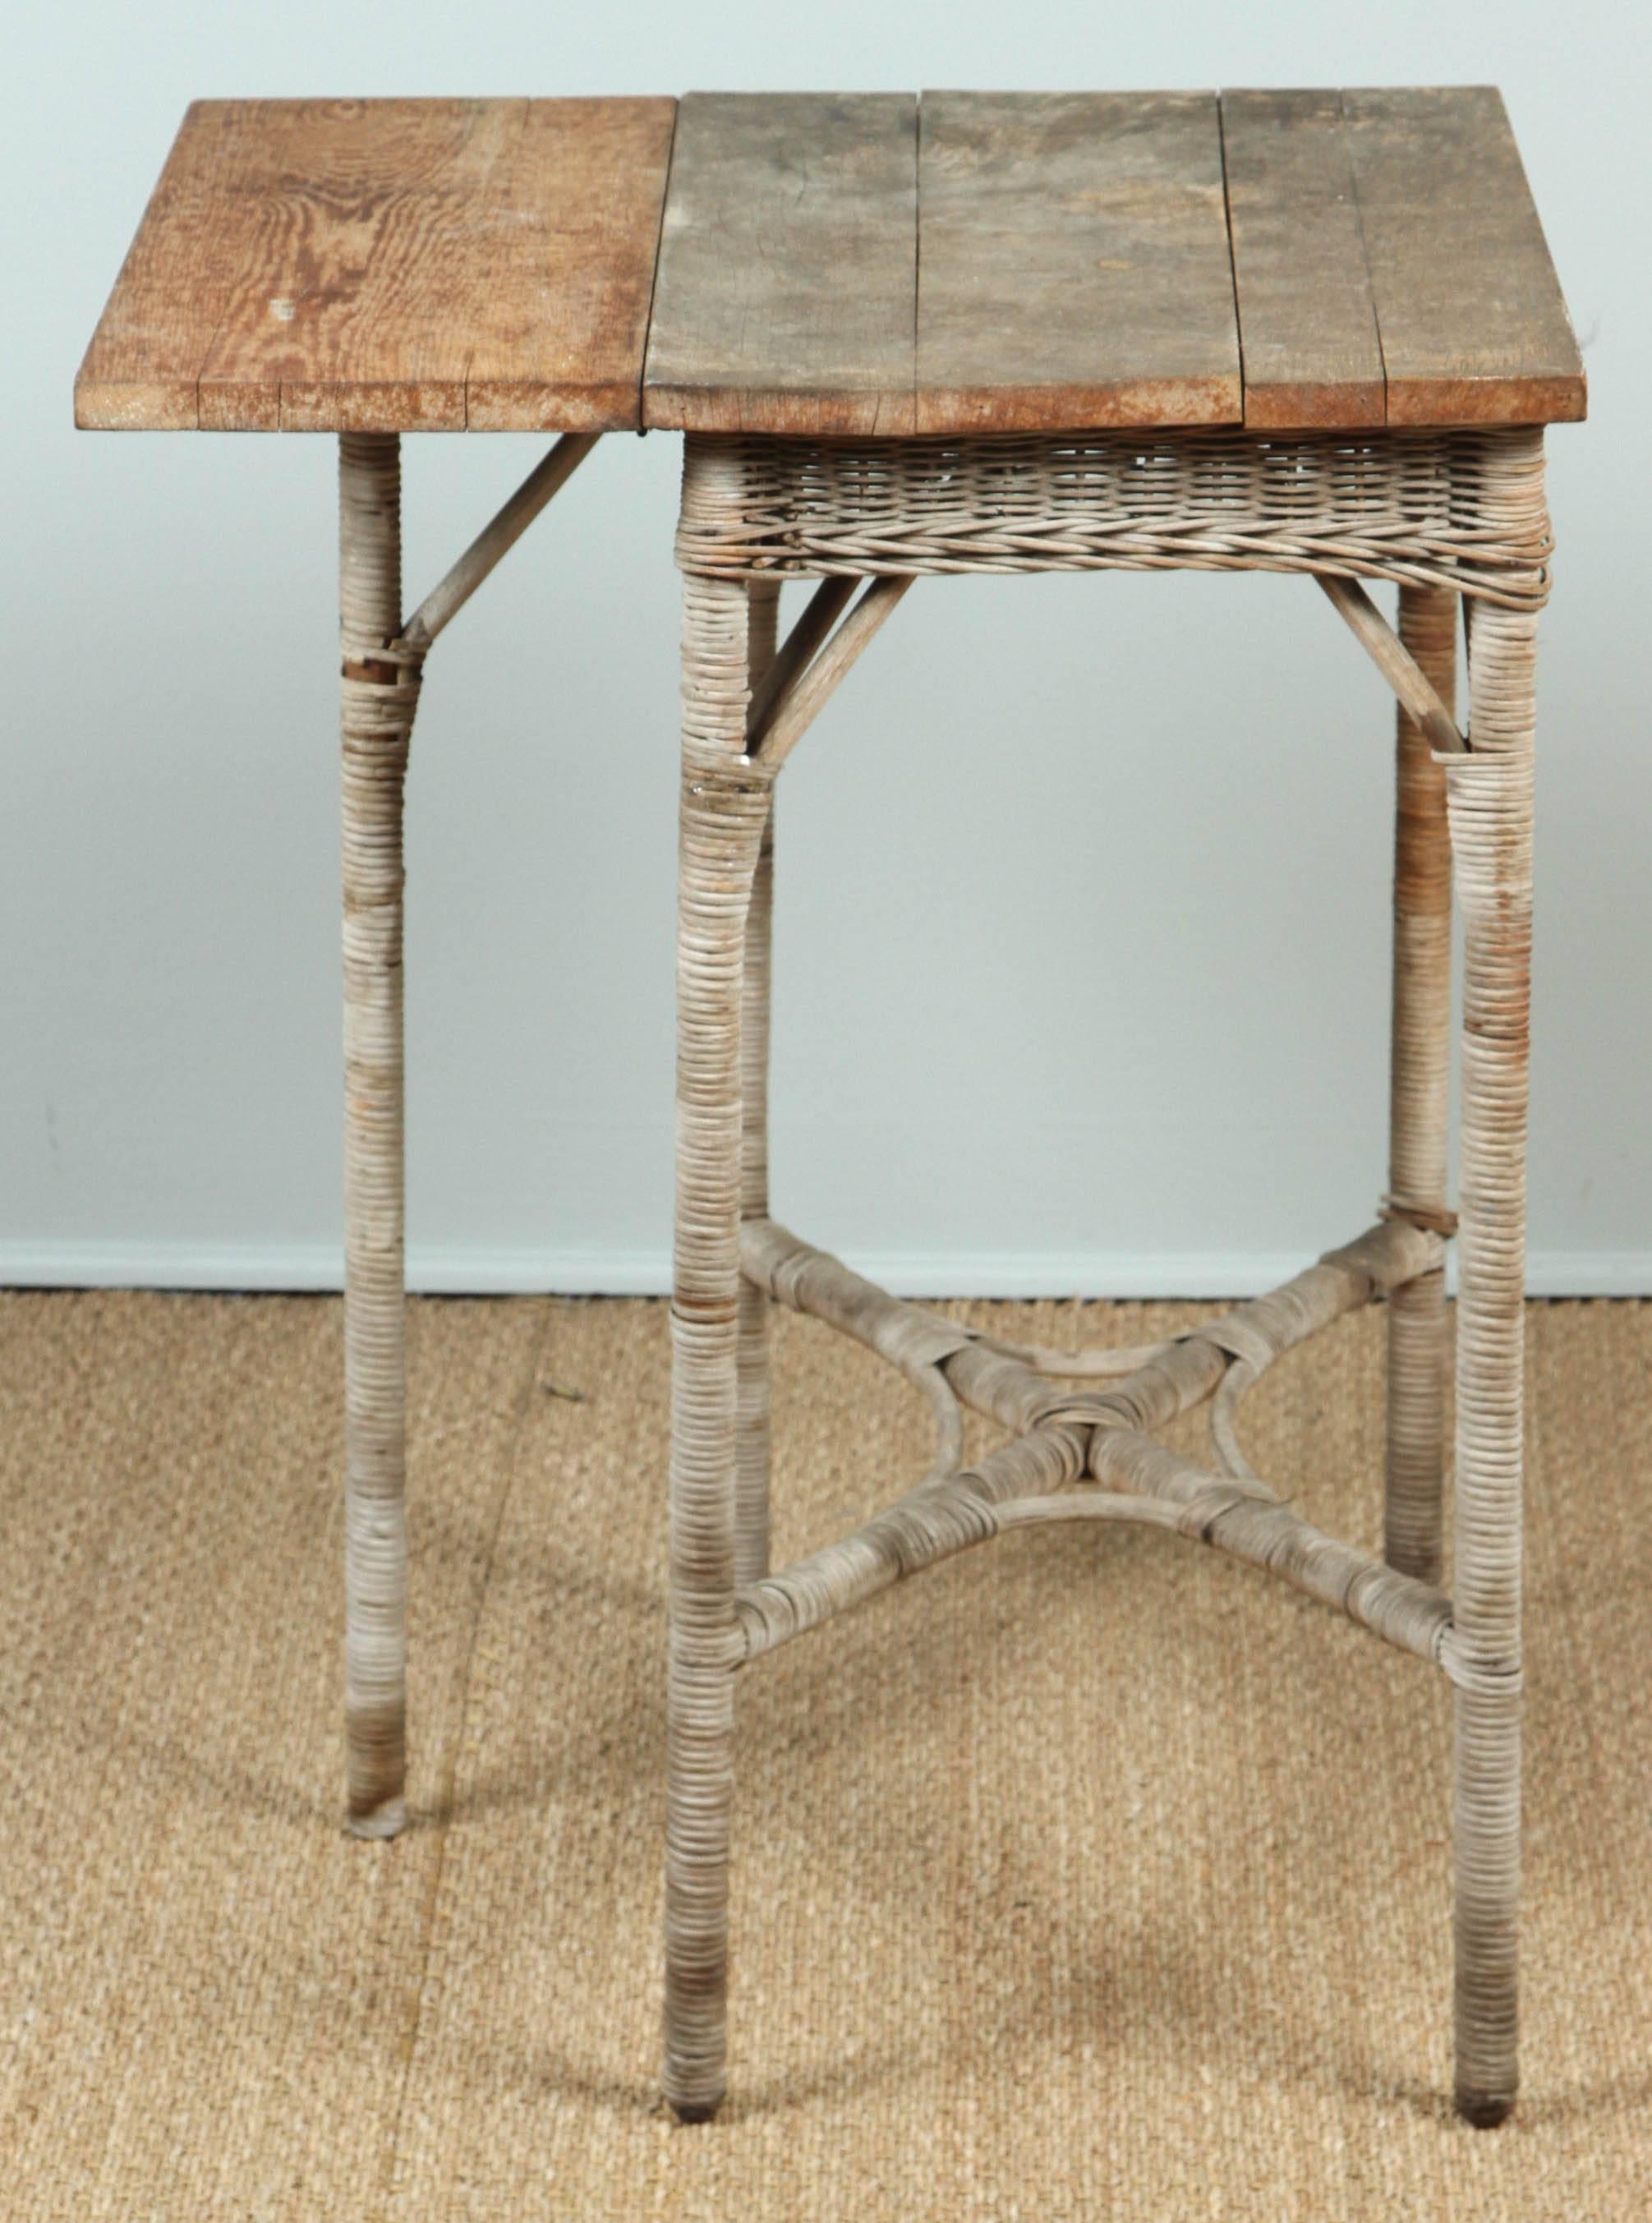 20th Century Vintage Wood and Wicker Small Gate Leg Table